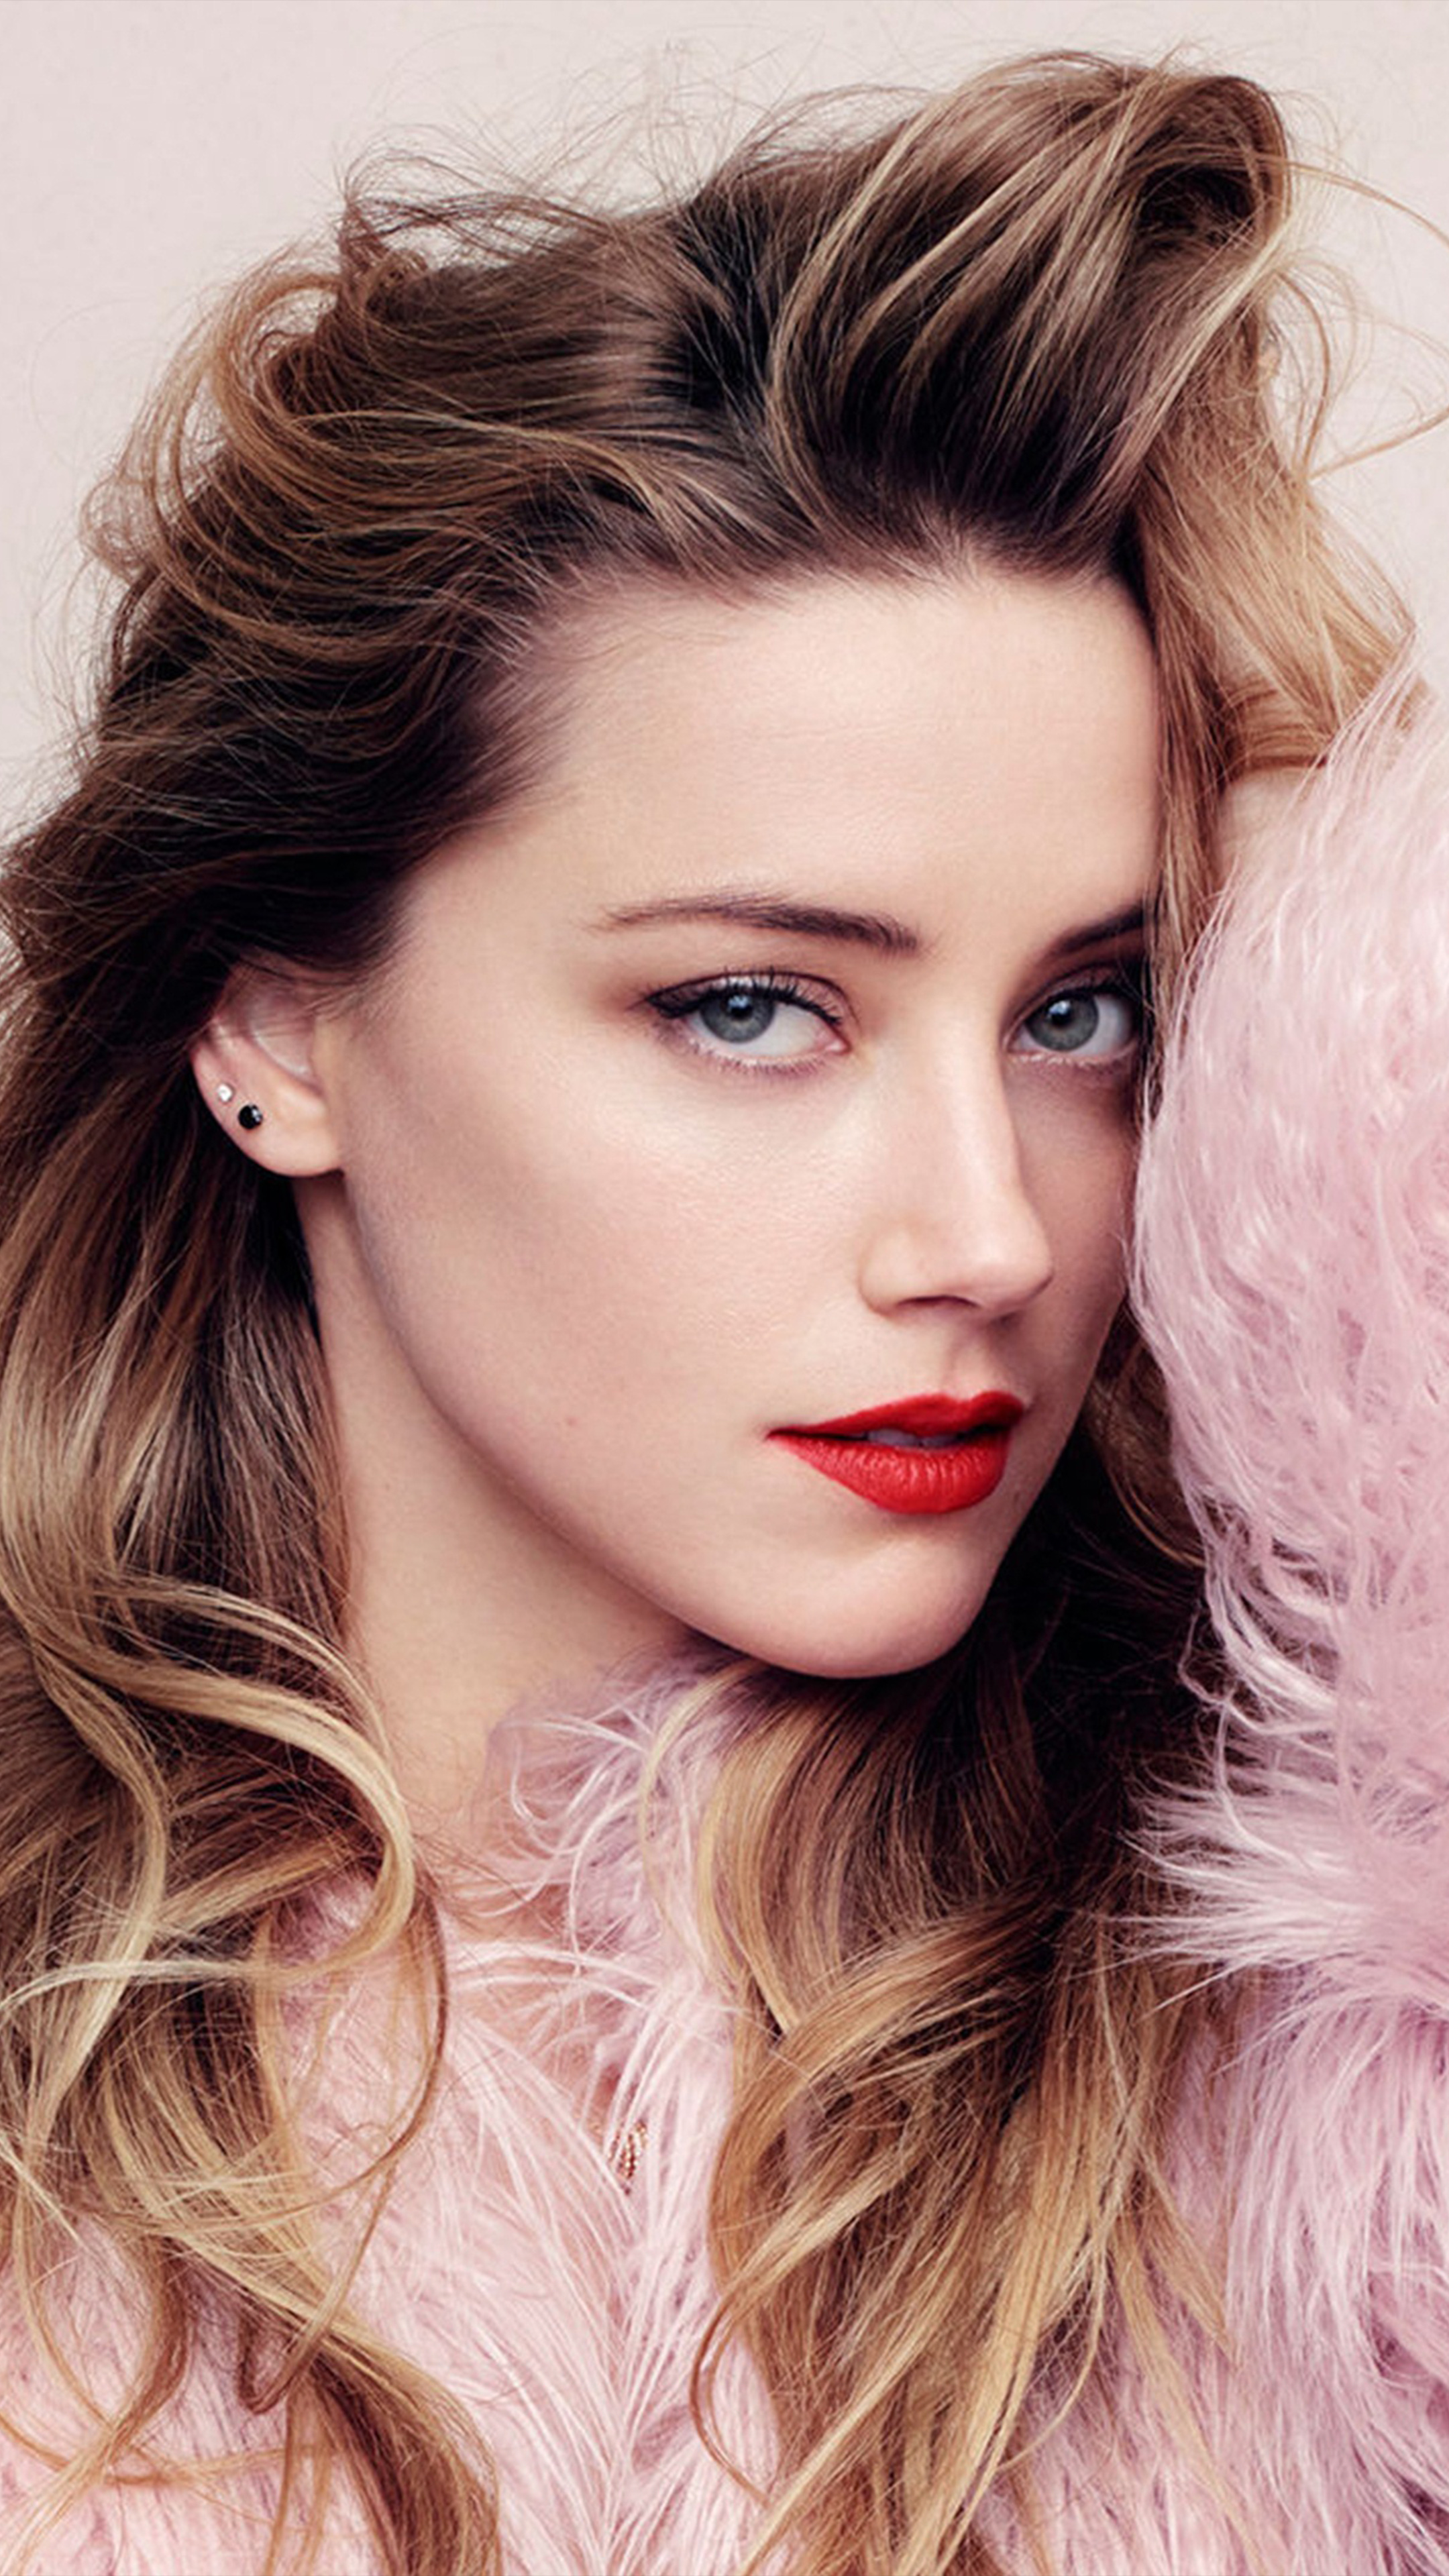 Download Gorgeous Amber Heard Free Pure 4K Ultra HD Mobile 